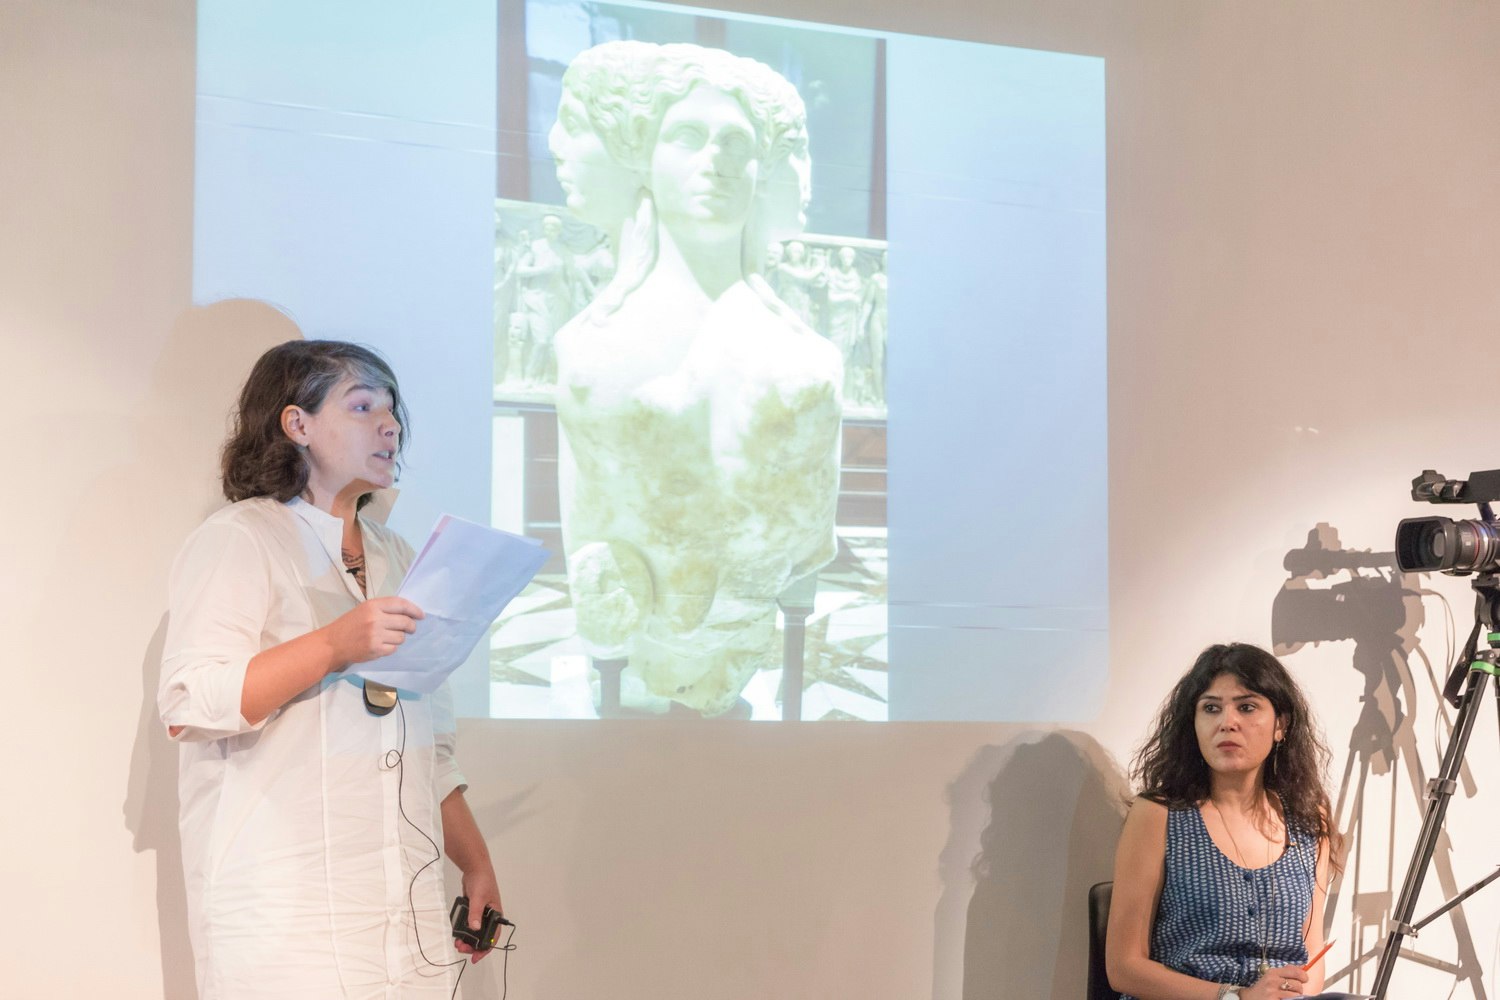 A female-presenting figure in a long white button-up shirt holding some sheets of white paper speaks in front of a projection of a three-headed bust.